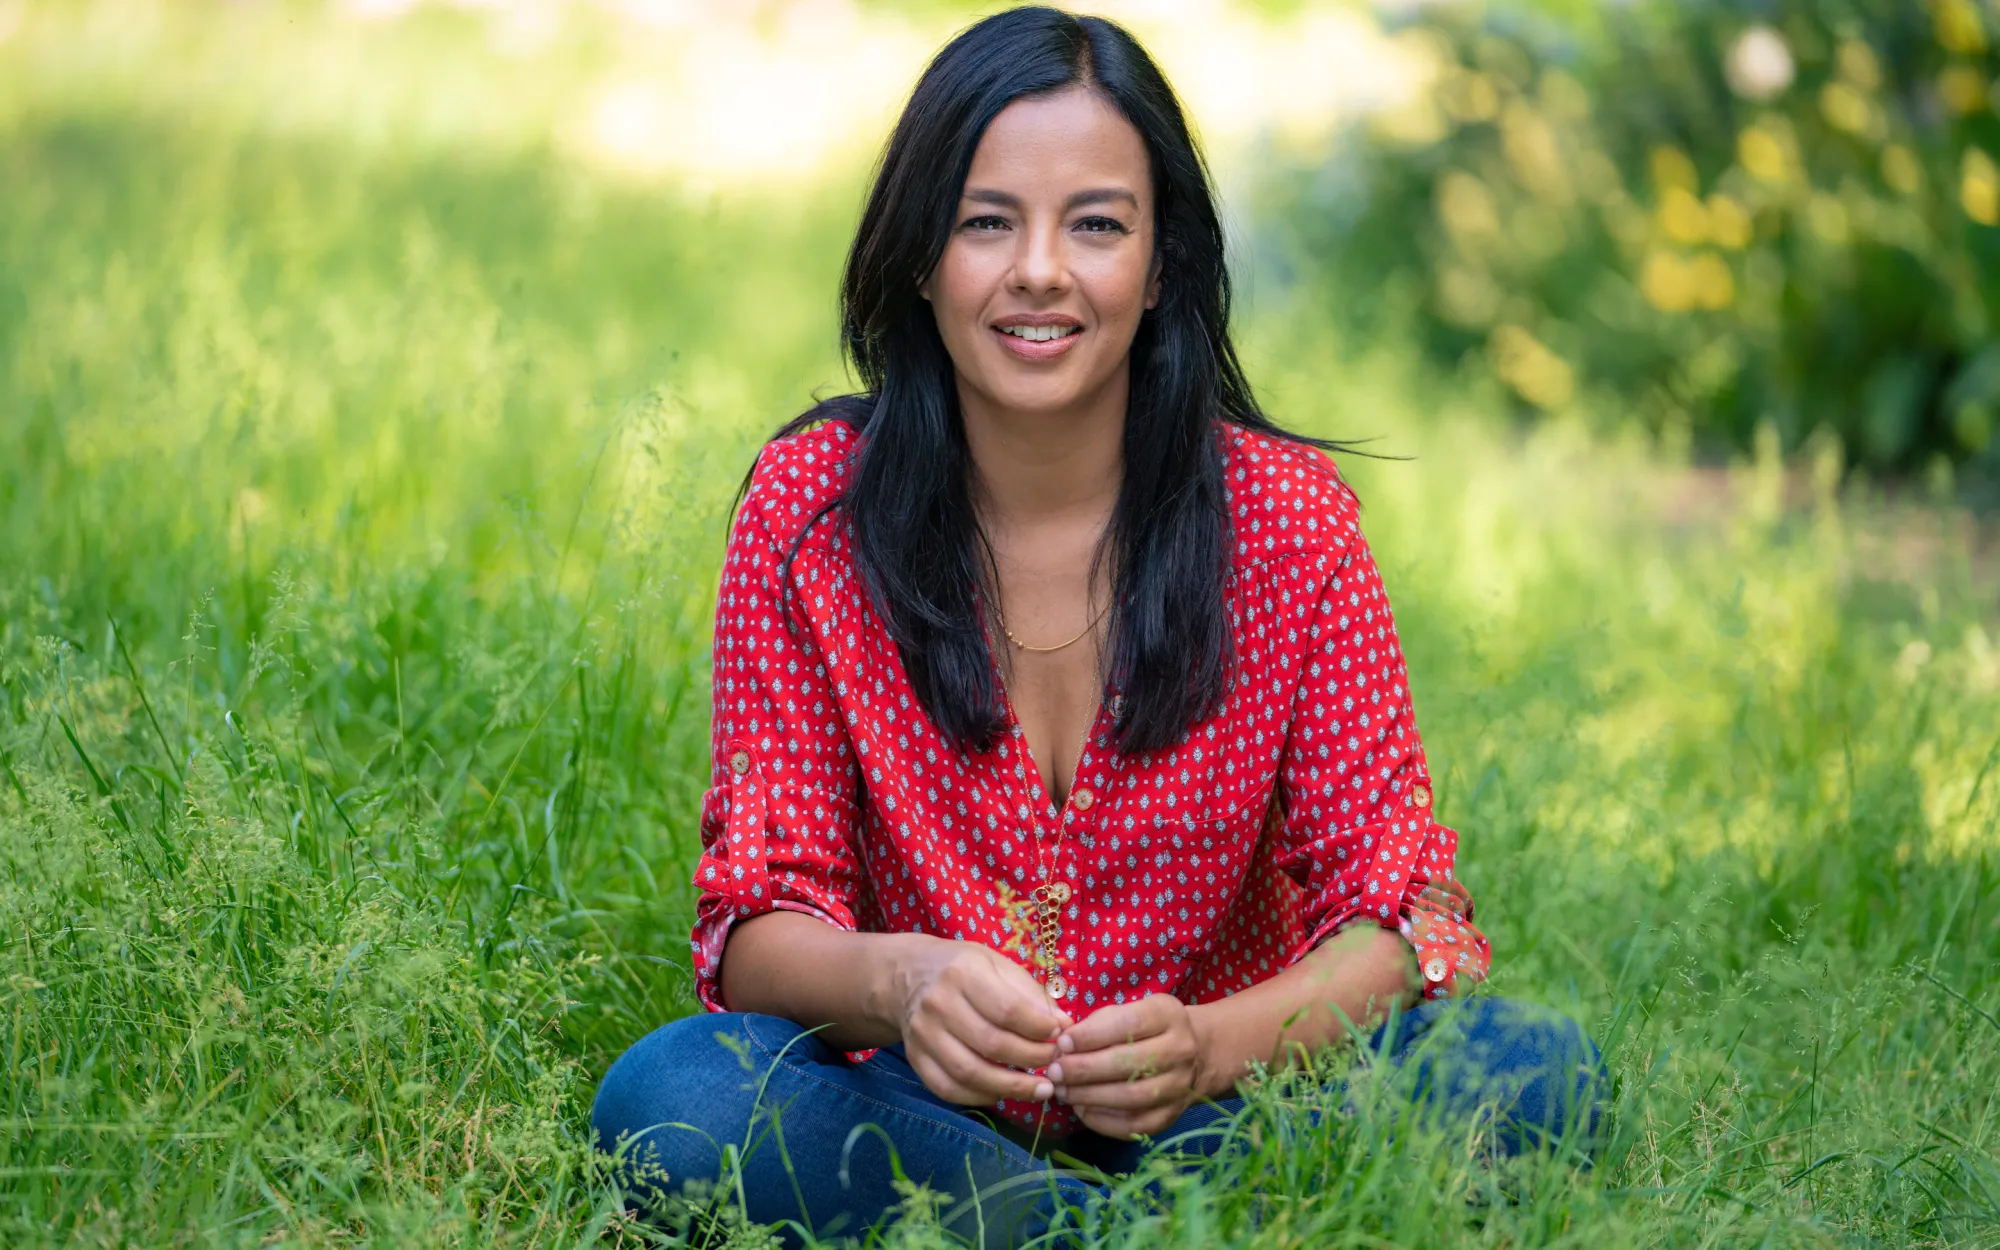 Liz Bonnin sitting on the grass wearing a red shirt and jeans.